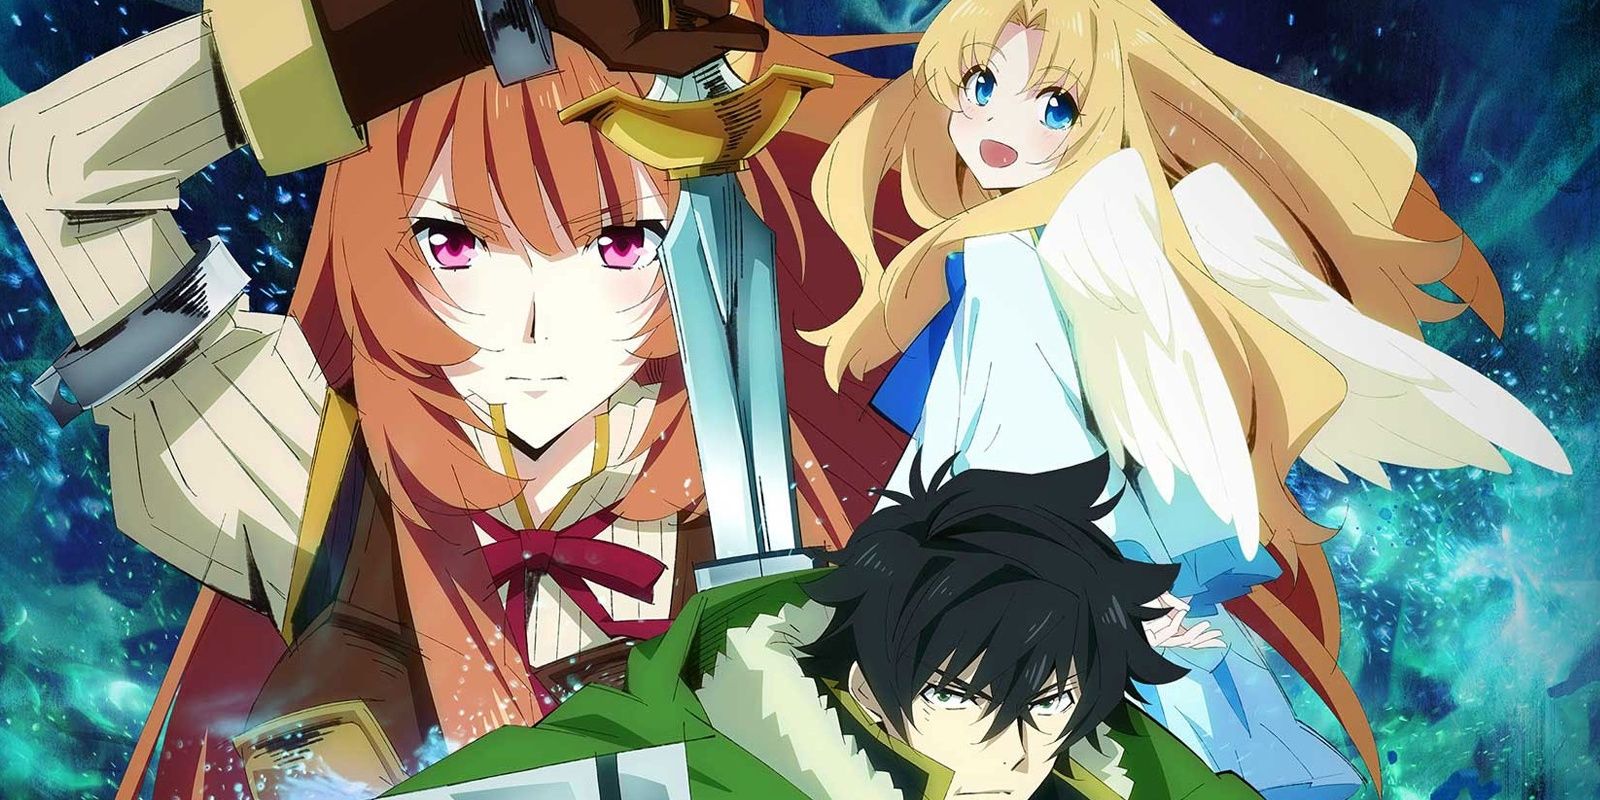 Key art for The Rising of the Shield Hero